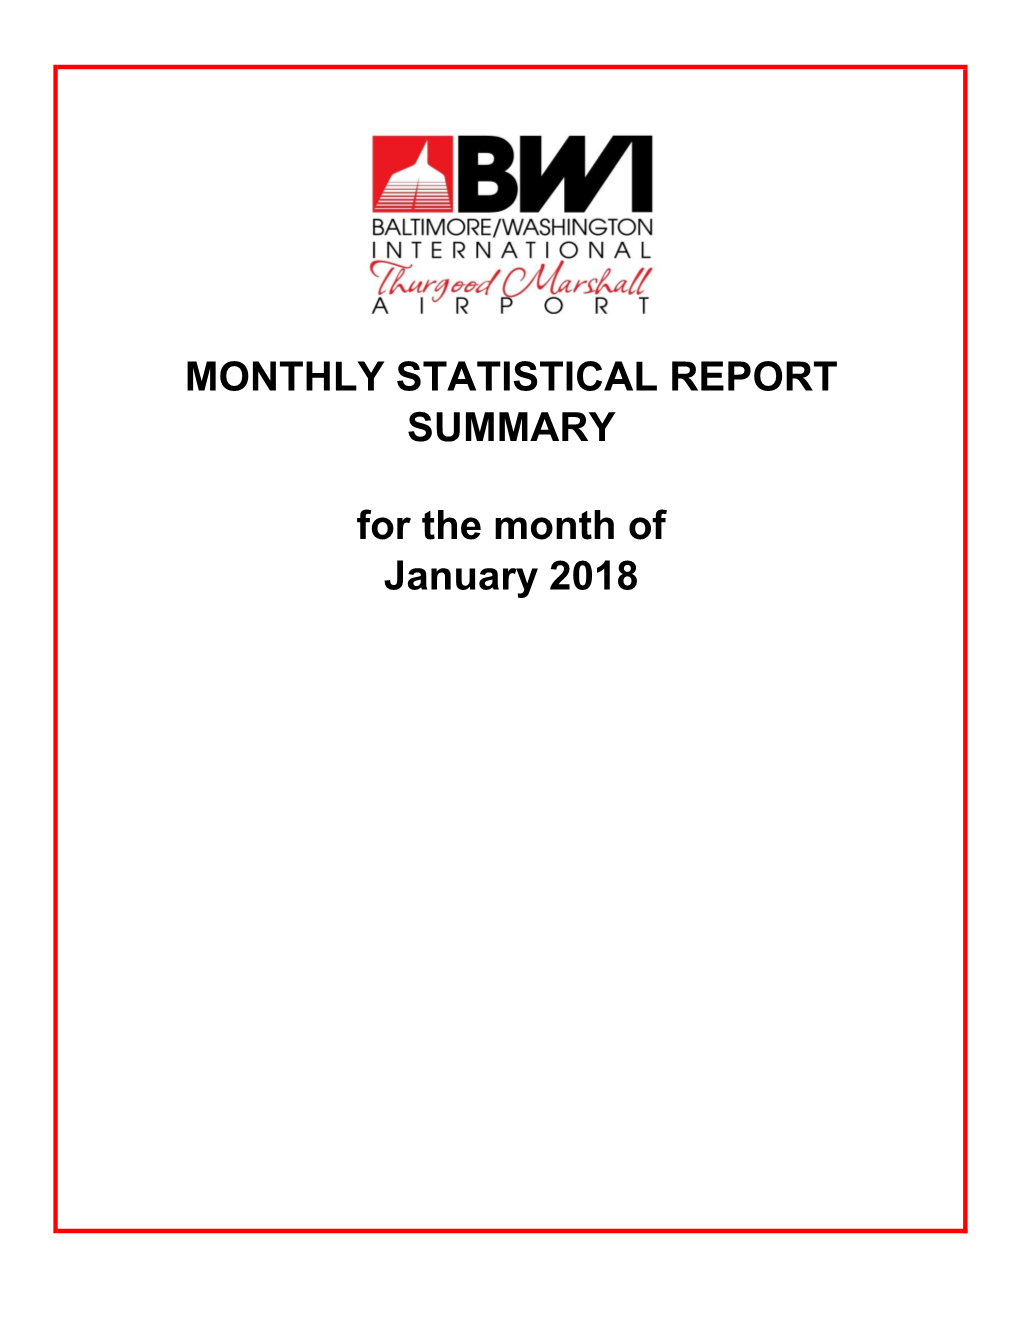 MONTHLY STATISTICAL REPORT for the Month of January 2018